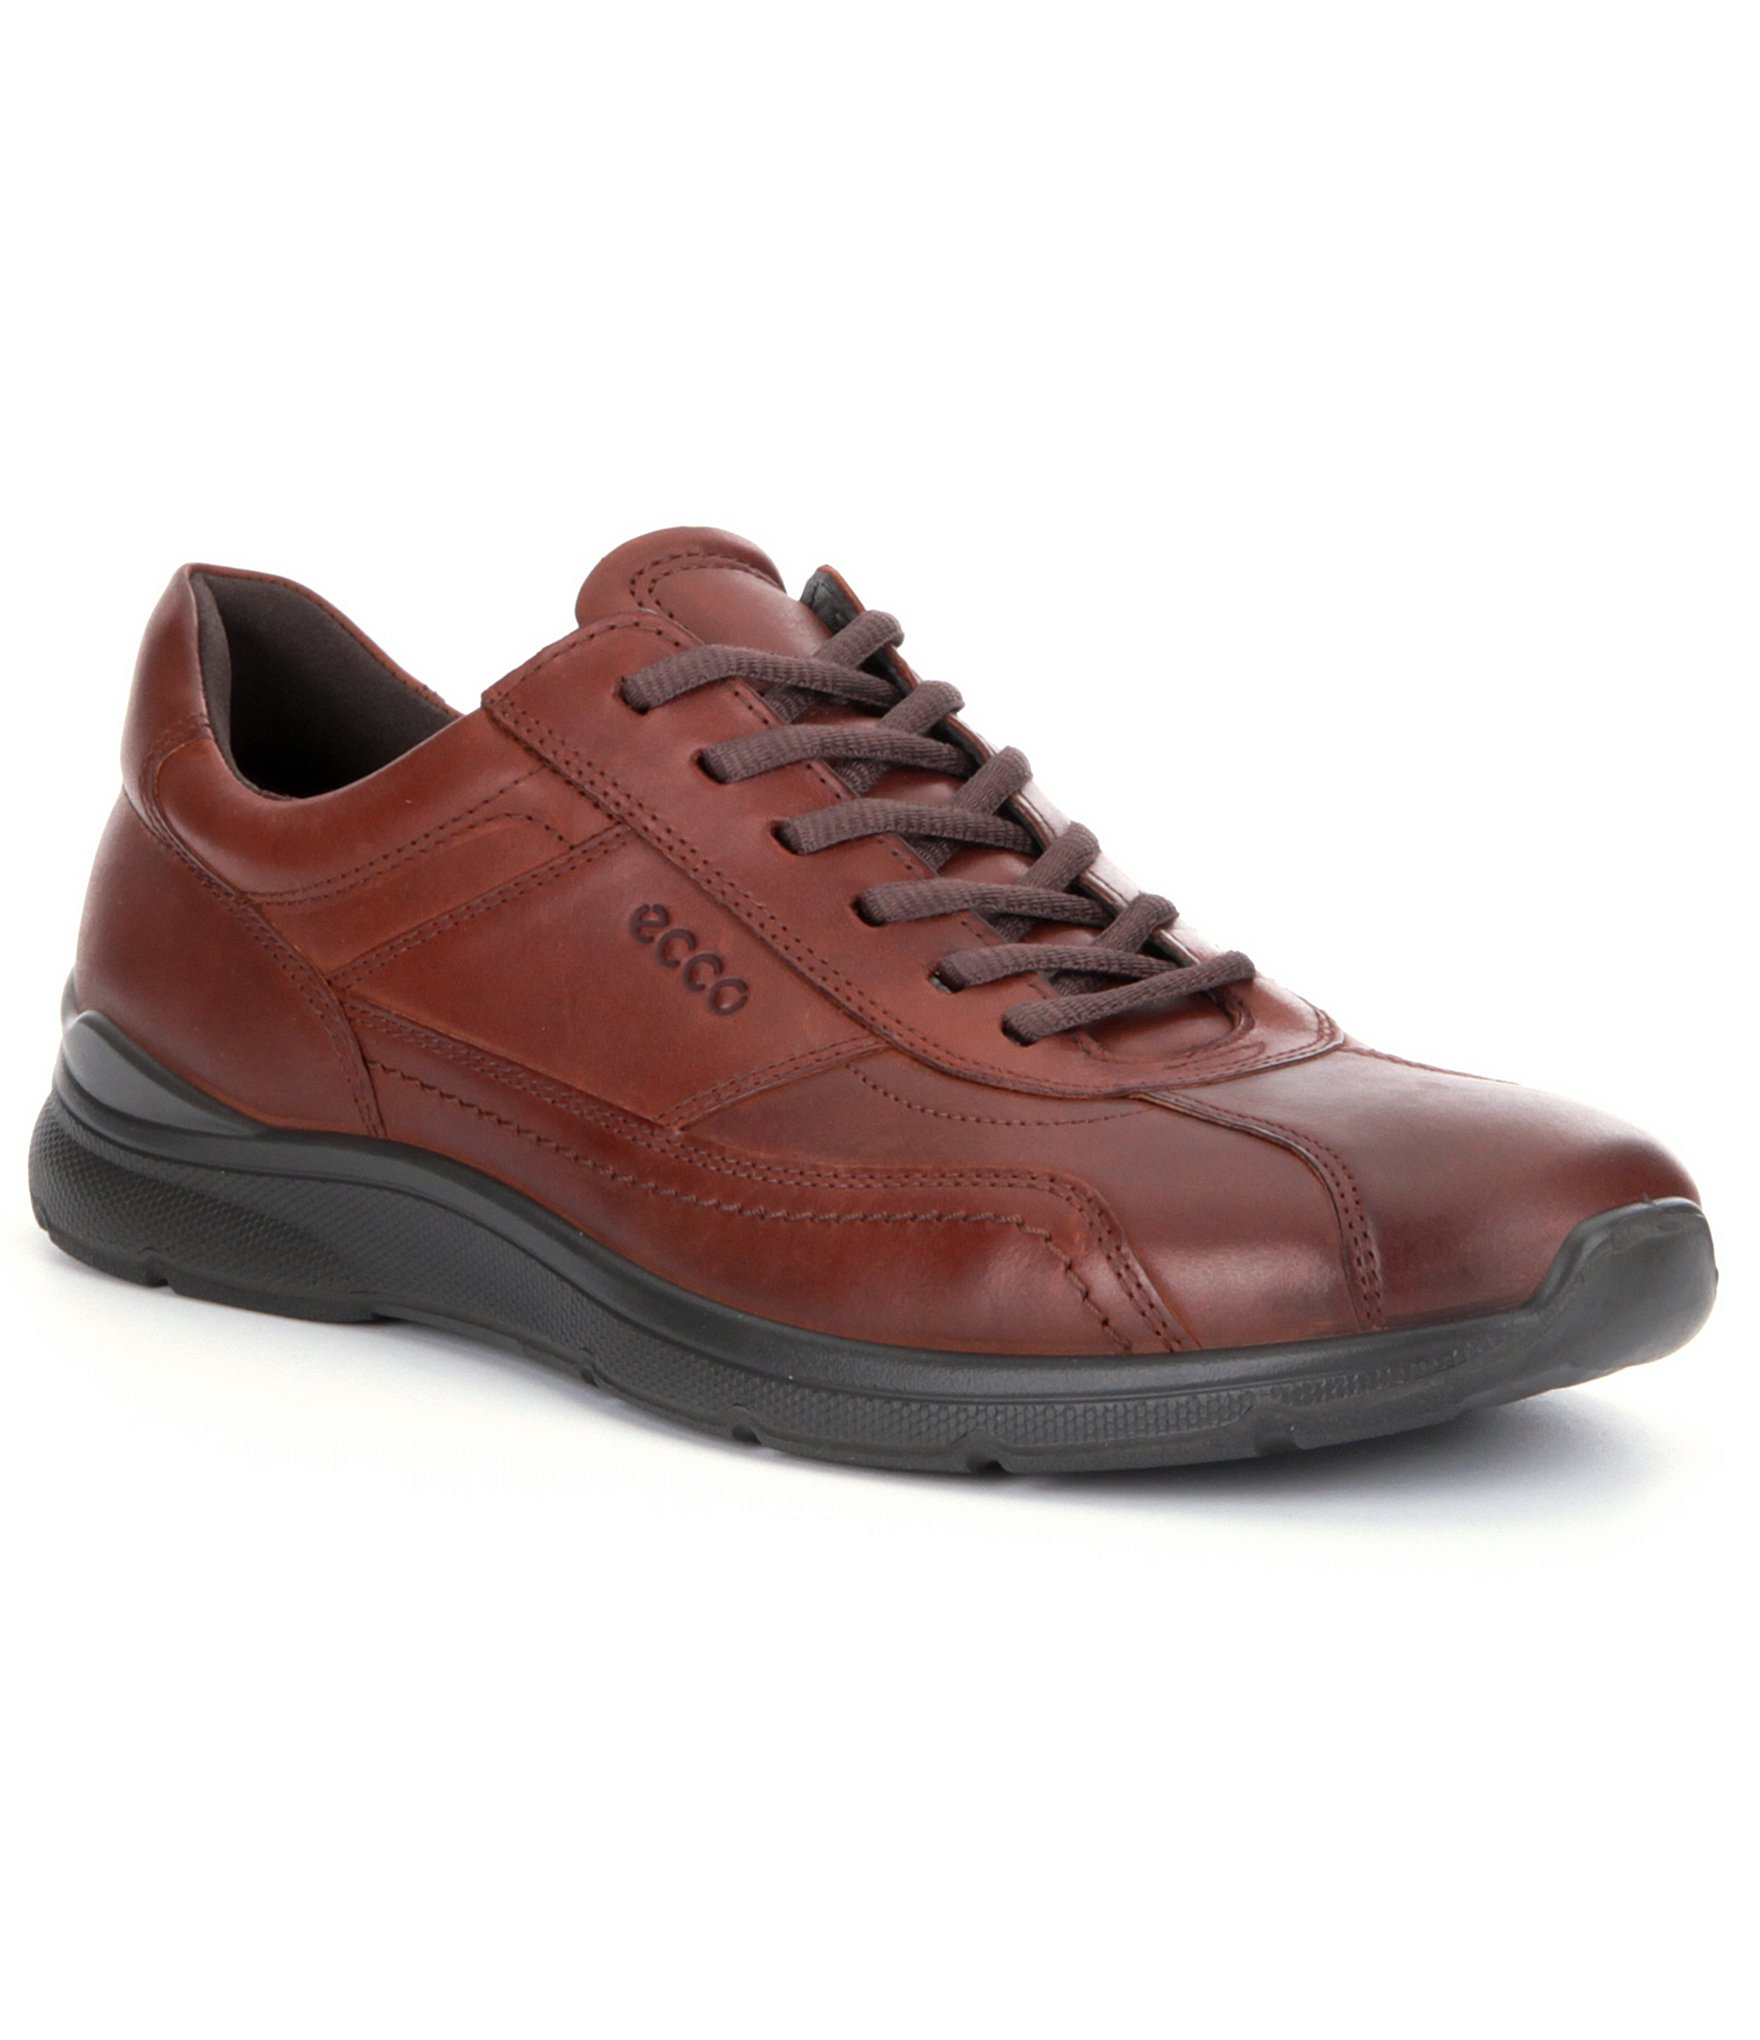 Ecco Irving Shoes in Brown for Men - Lyst